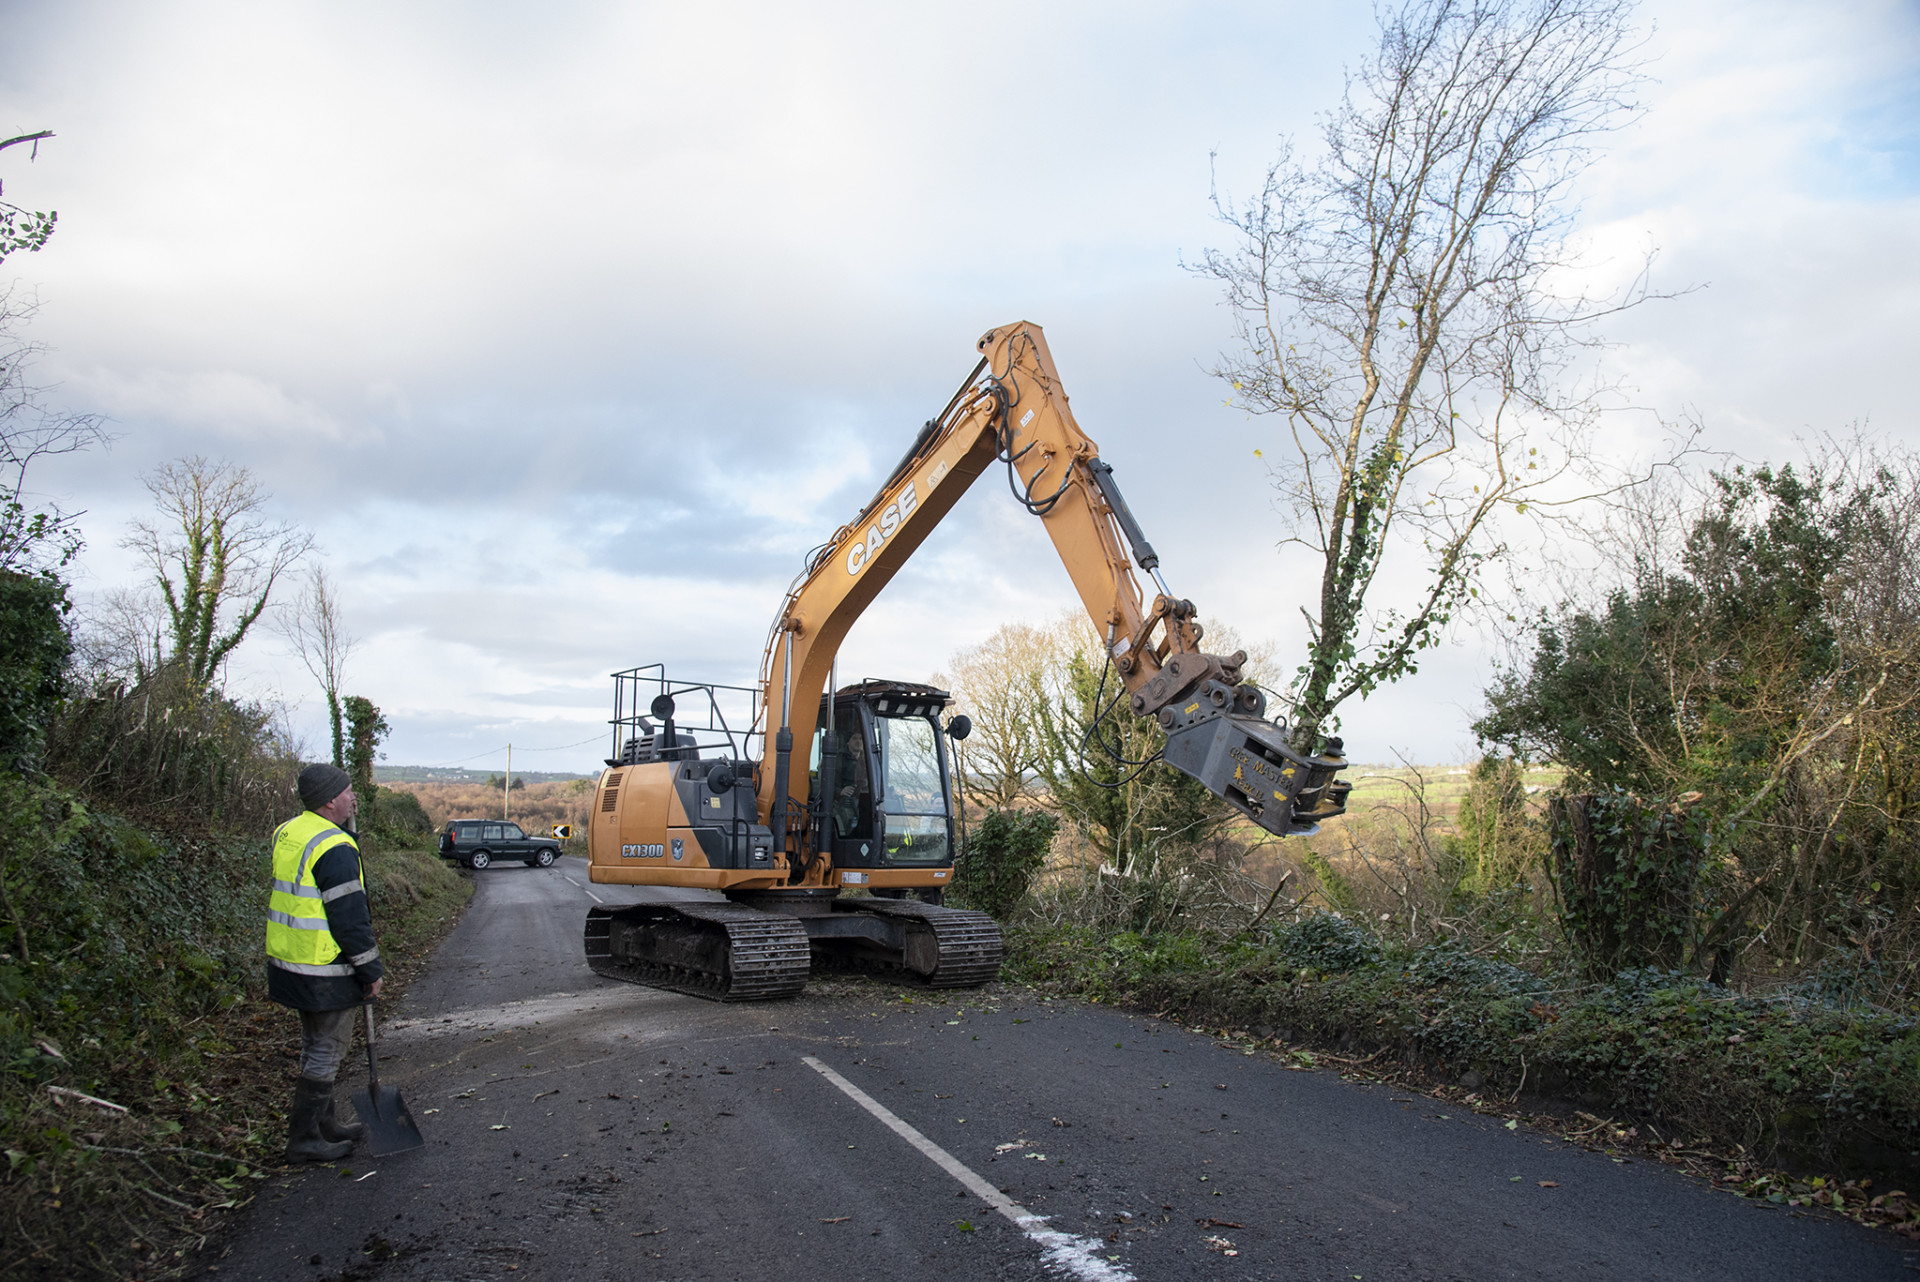 Residents and landowners take action over dangerous road